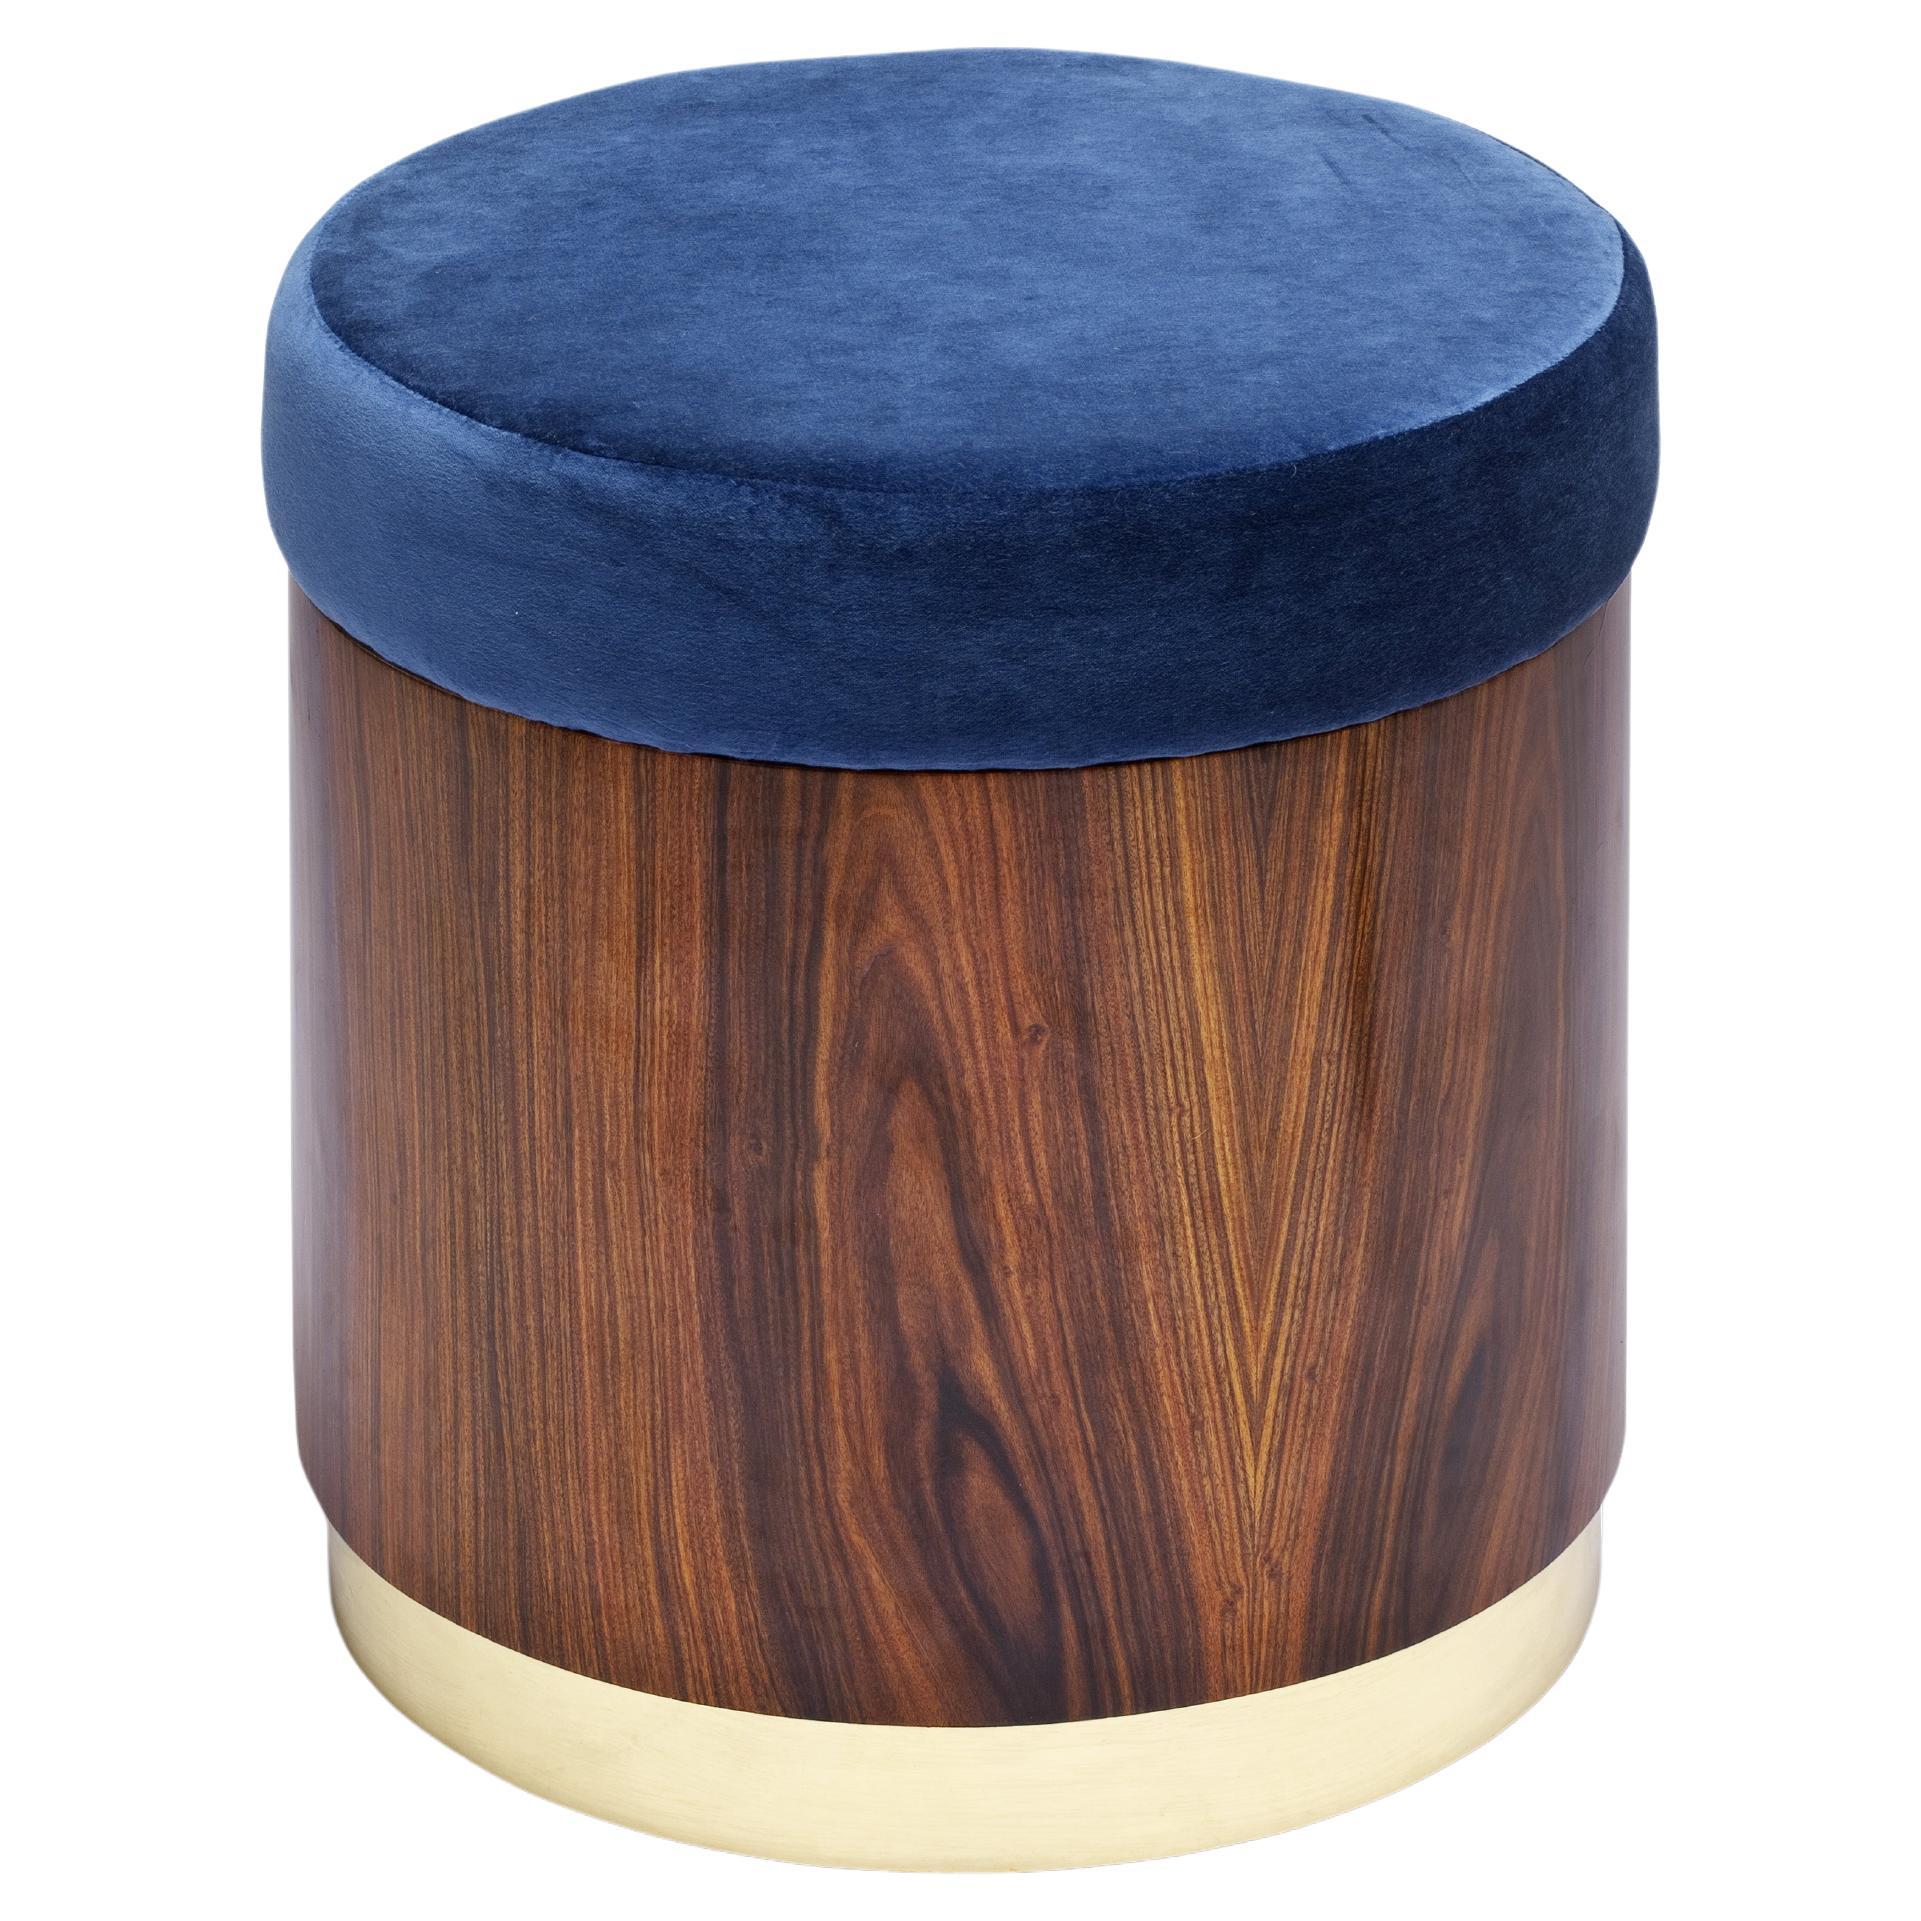 Lune A Stool, in Ironwood and Polished Brass, Handcrafted in Portugal by Duistt